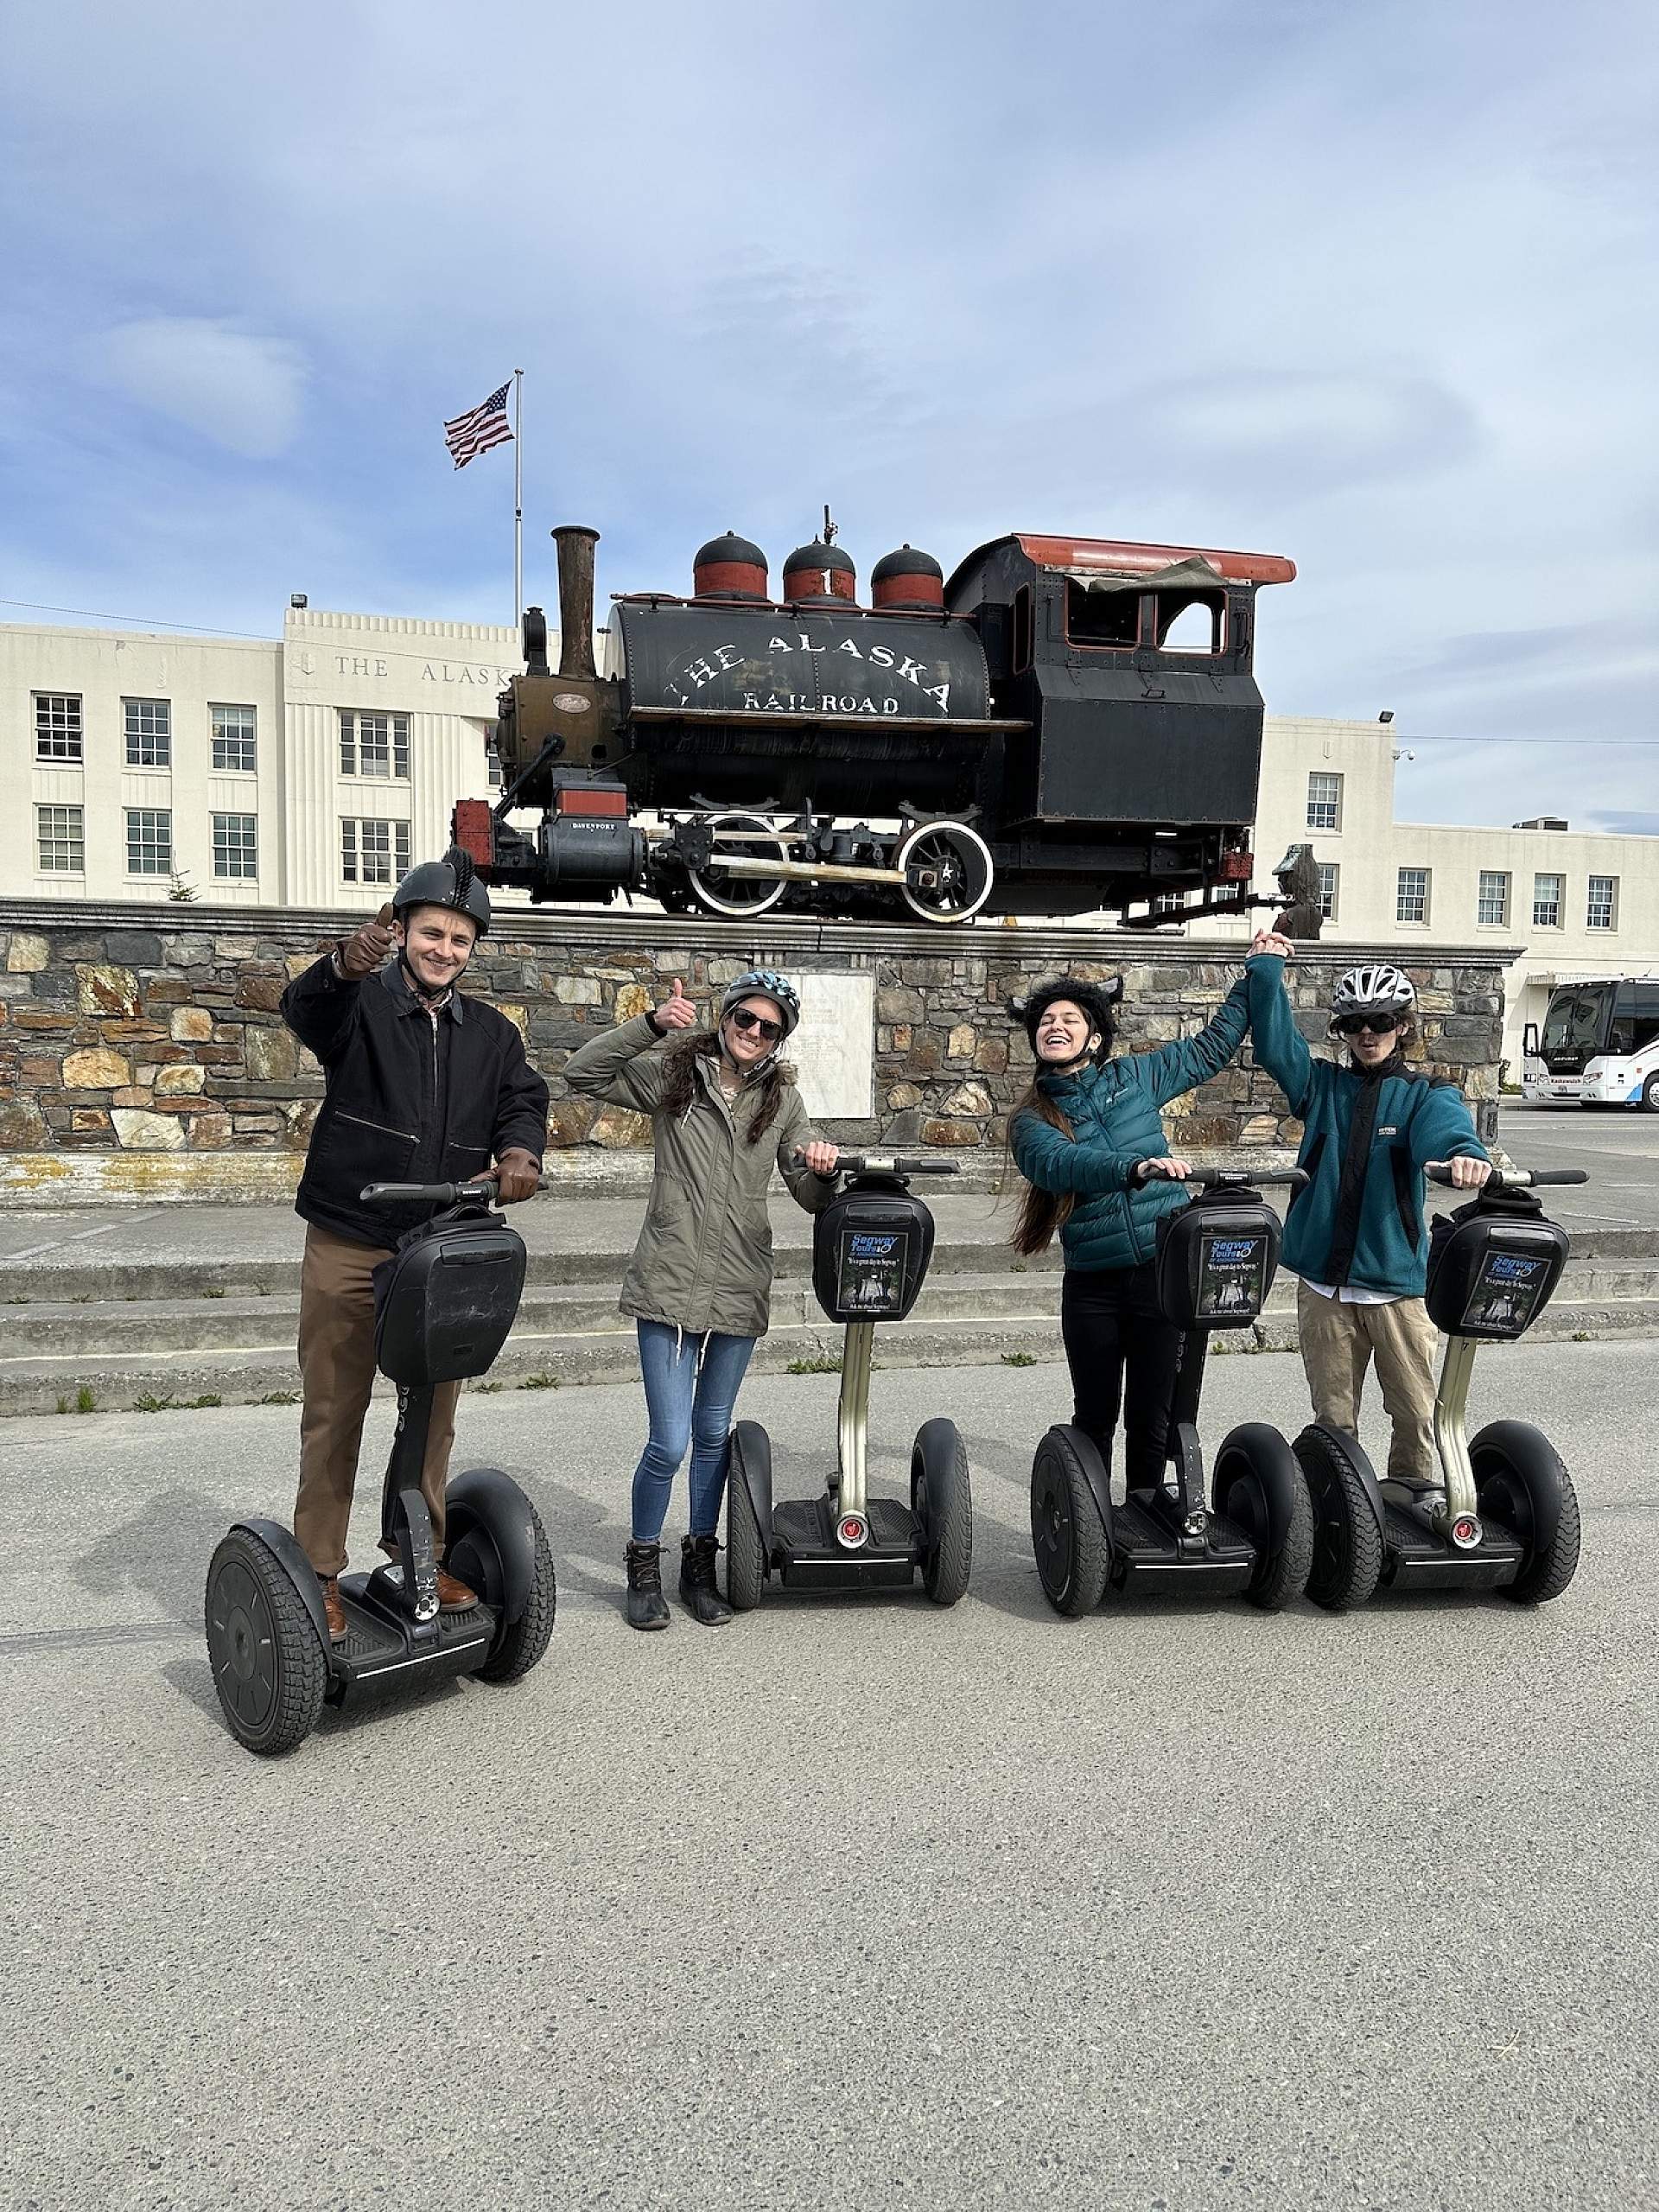 A group of Segways pose in front of the Alaska Railroad Depot in Anchorage, Alaska.